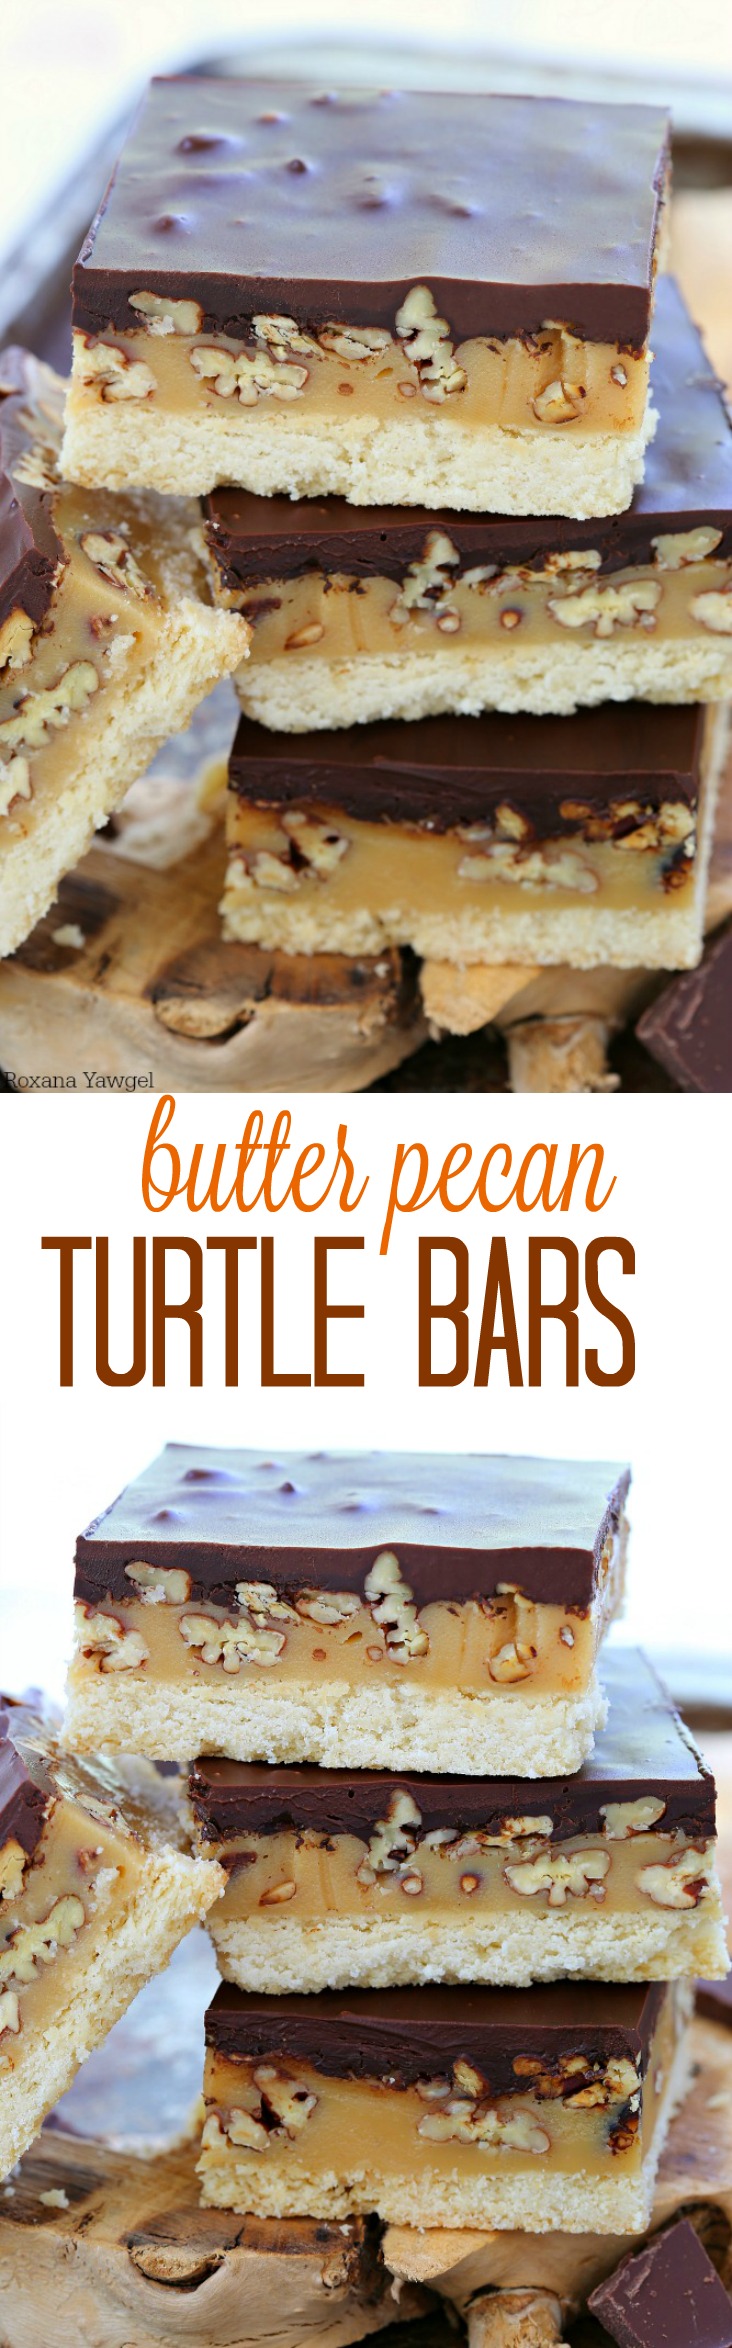 Easy to make butter pecan turtle bars everyone will go crazy over! Buttery cookie, gooey caramel, crunchy pecans and rich ganache - 4 layer of goodness in every bite! 